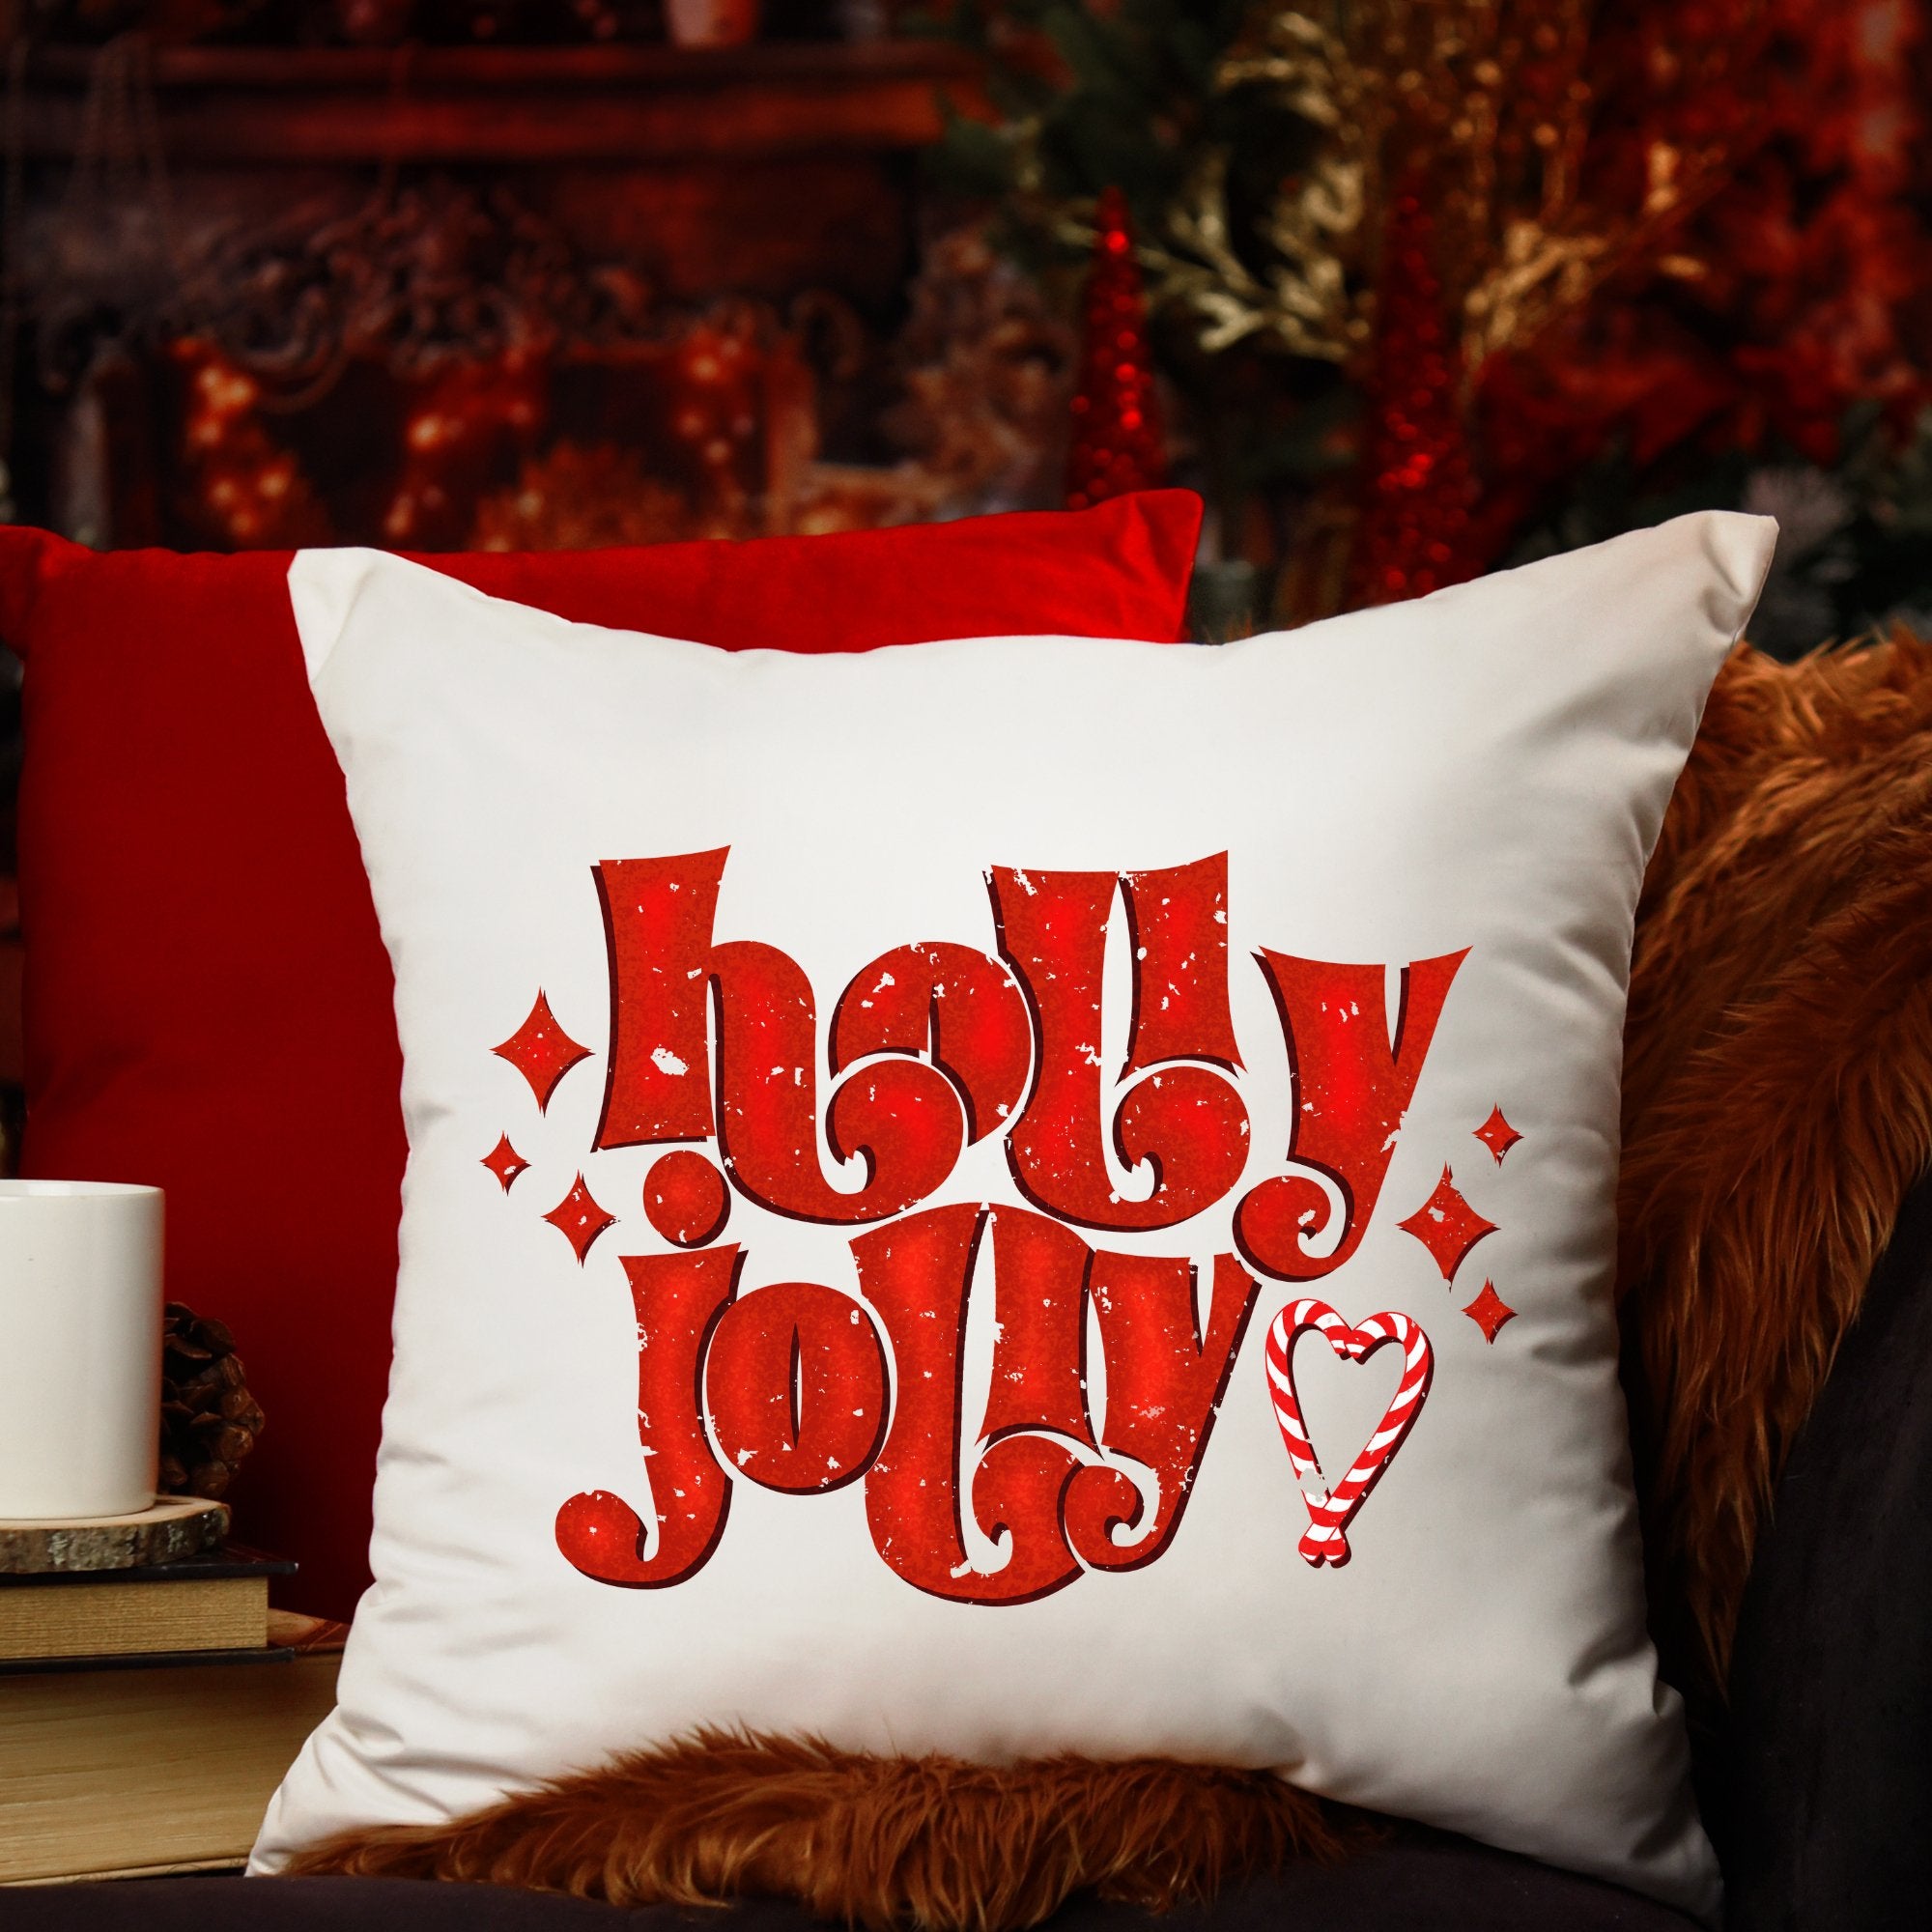 Holly Jolly Christmas Pillow Cover - Trendznmore